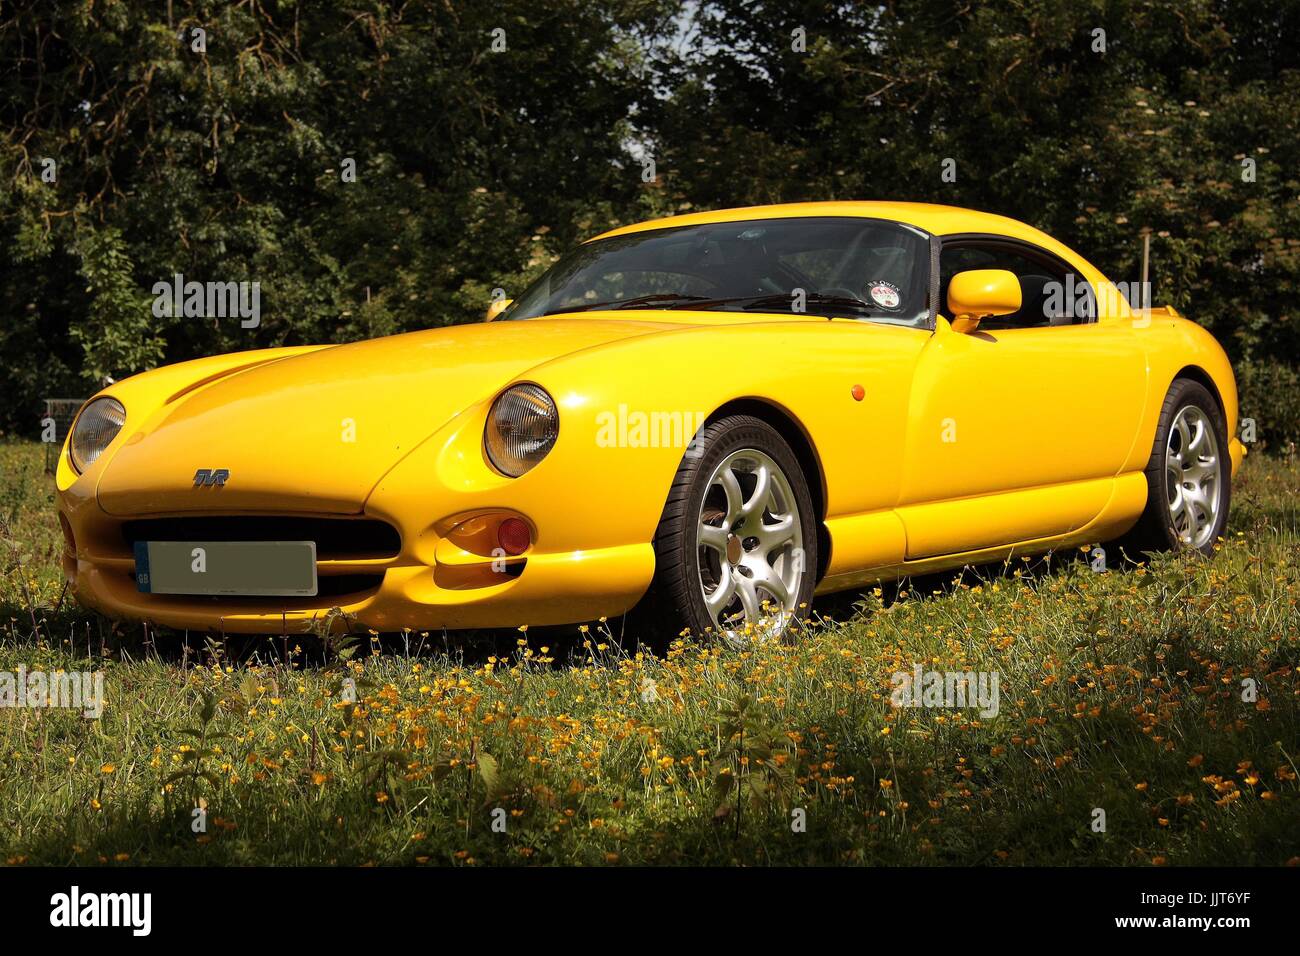 My favourite, TVR Cerbera on 16' Spiders Stock Photo